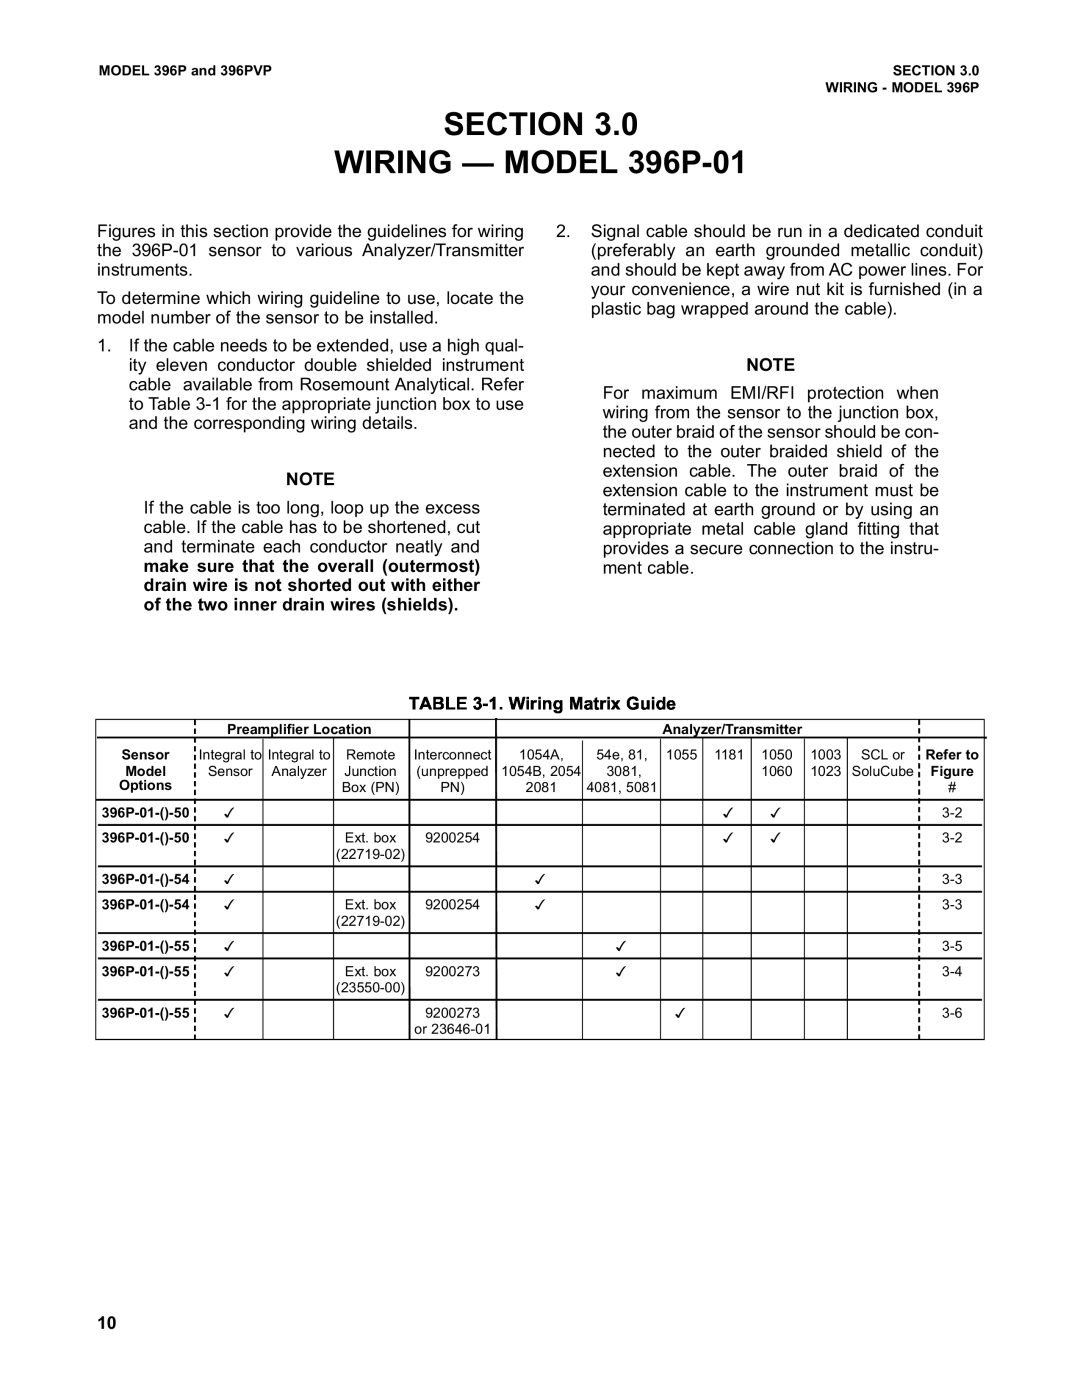 Emerson Process Management 396PVP instruction manual SECTION WIRING - MODEL 396P-01, 1.Wiring Matrix Guide 